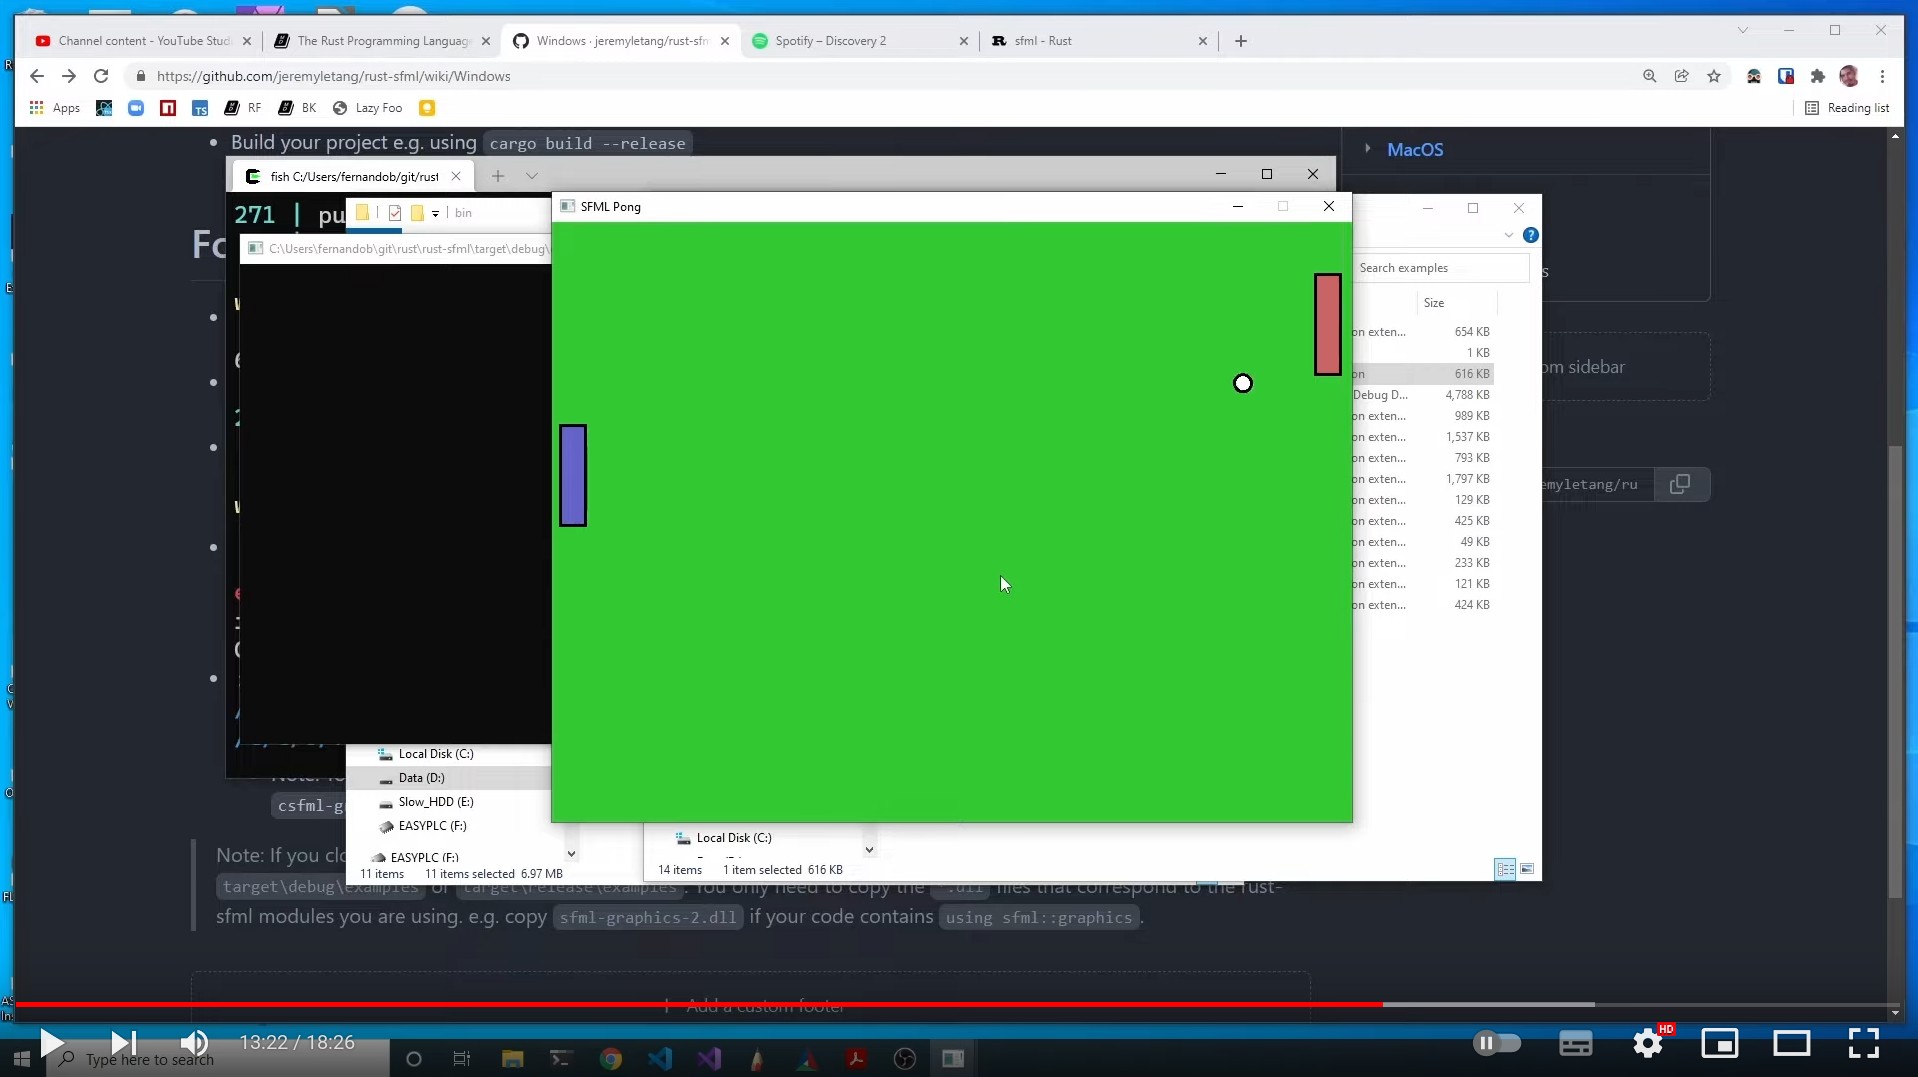 youtube preview: ping pong window and some dev windows in background